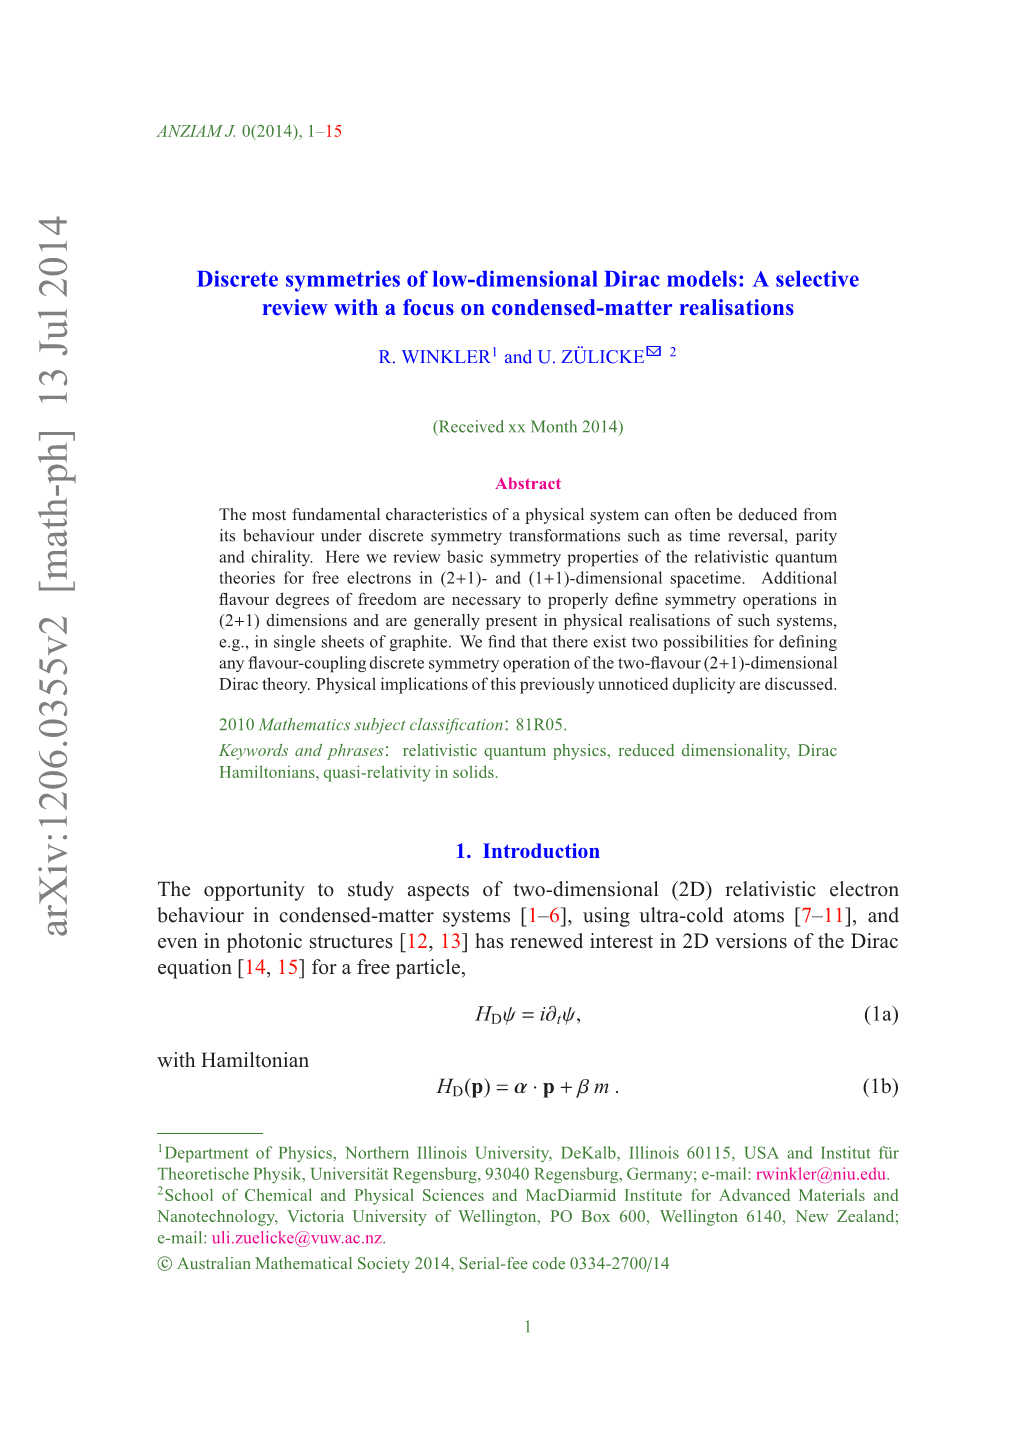 Discrete Symmetries of Low-Dimensional Dirac Models: a Selective Review with a Focus on Condensed-Matter Realisations